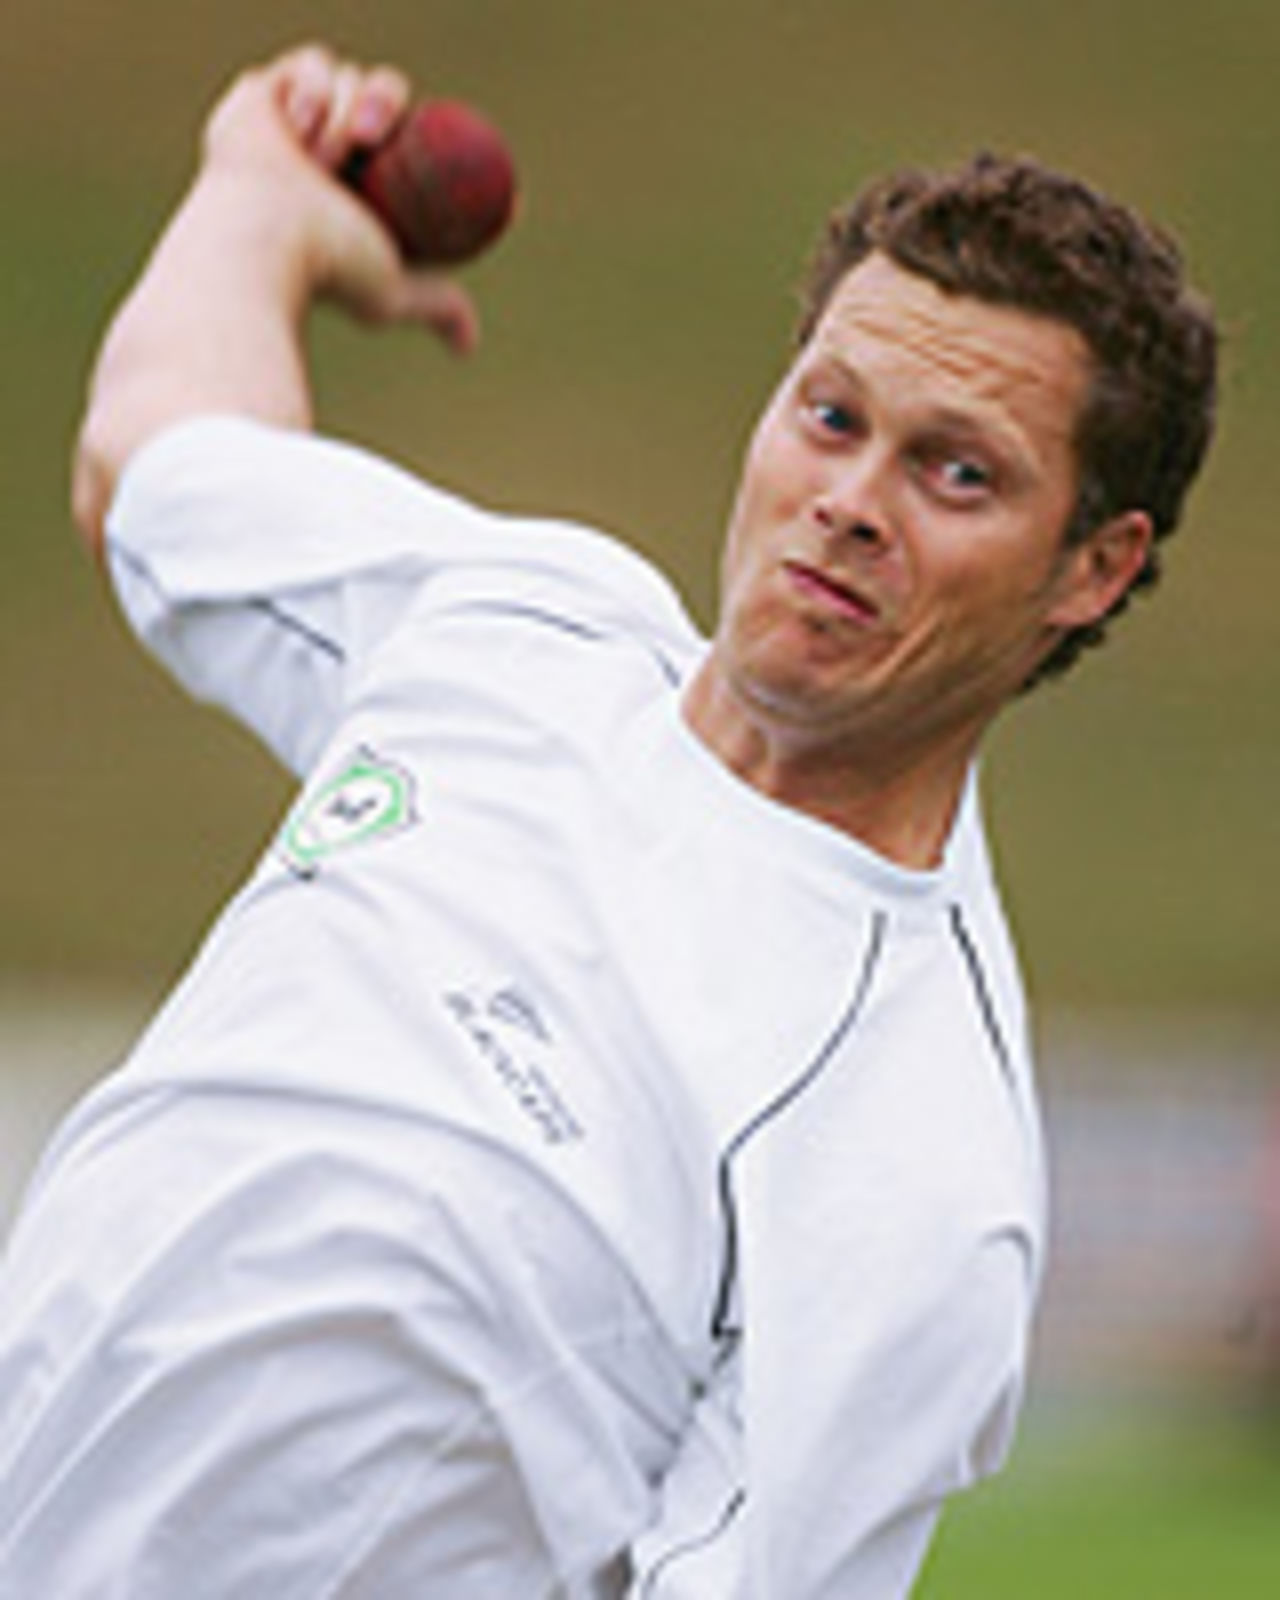 Paul Wiseman bowls in the nets a day before the Test, New Zealand v Australia, 2nd Test, Wellington, March 17, 2005